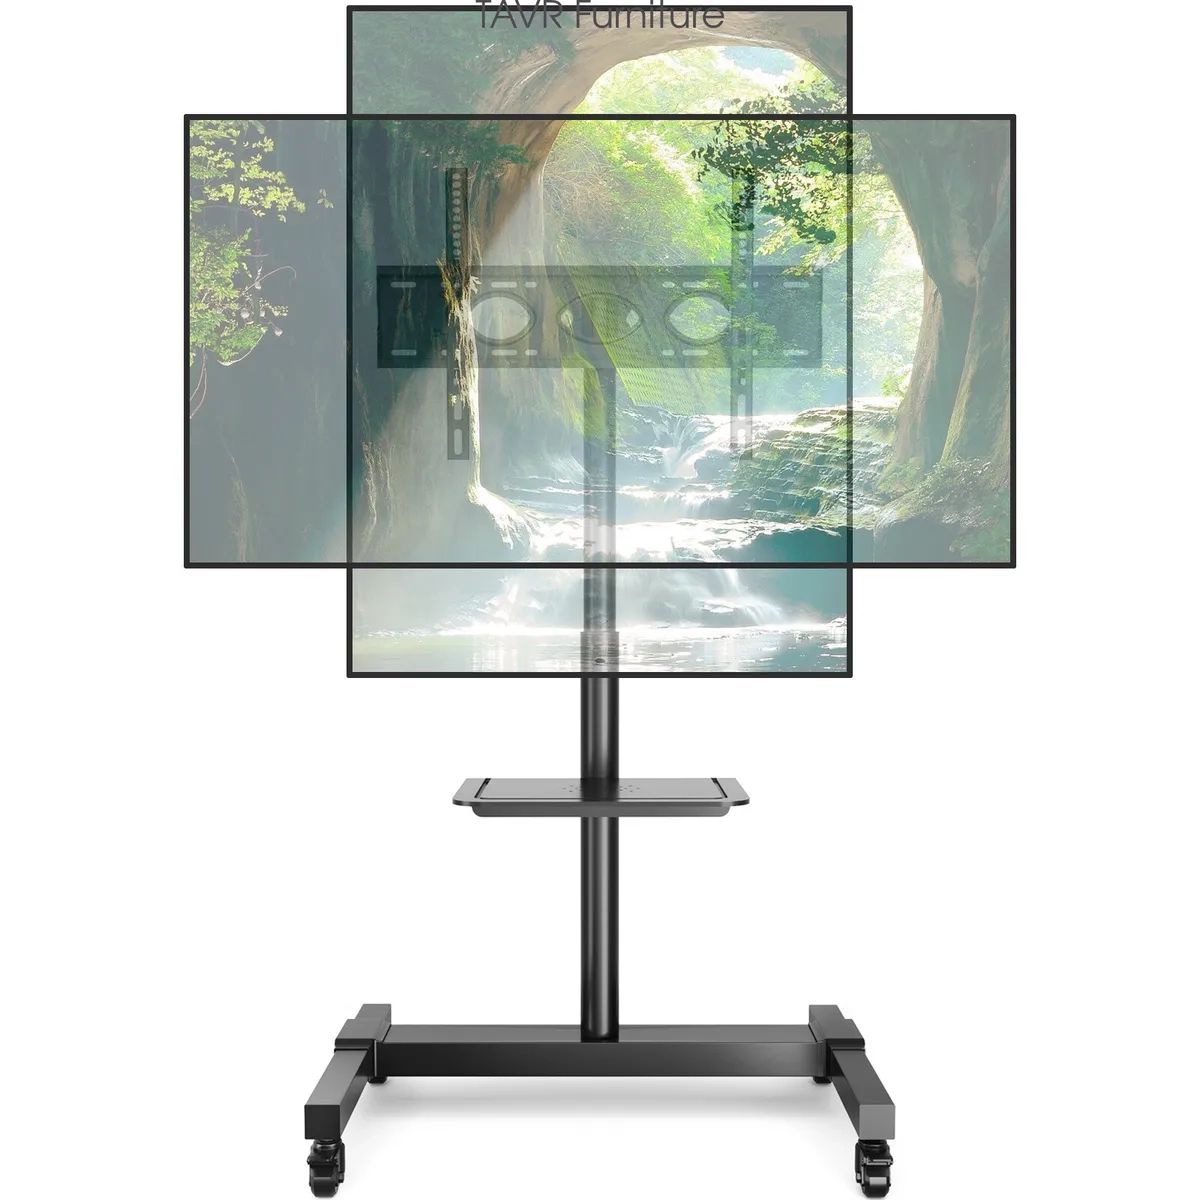 Universal Mobile Tv Stand Tilt Rolling Tv Cart With Wheels For Tvs Up To 70  Inch | Ebay For Mobile Tilt Rolling Tv Stands (View 2 of 15)